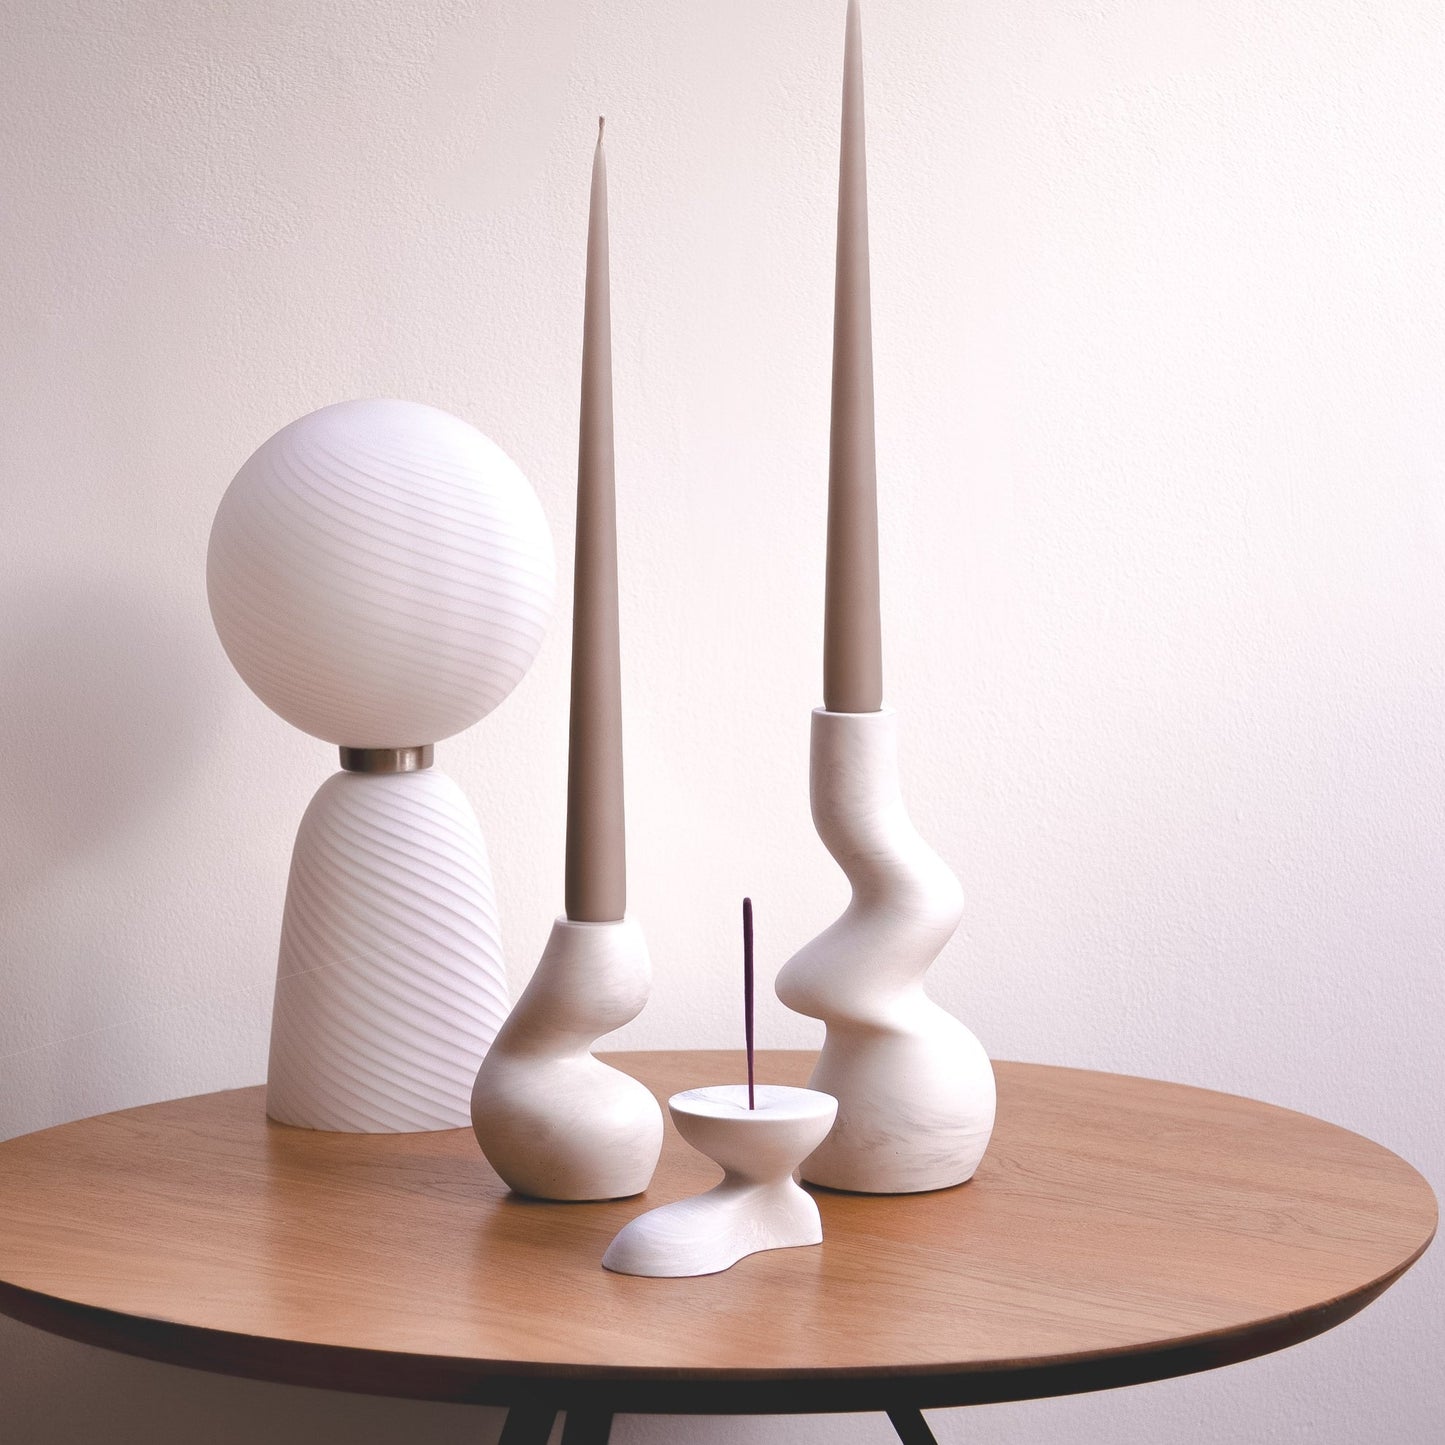 [GRAVITY] Set of 3 | Two Types Candle Holders + Incense Burner